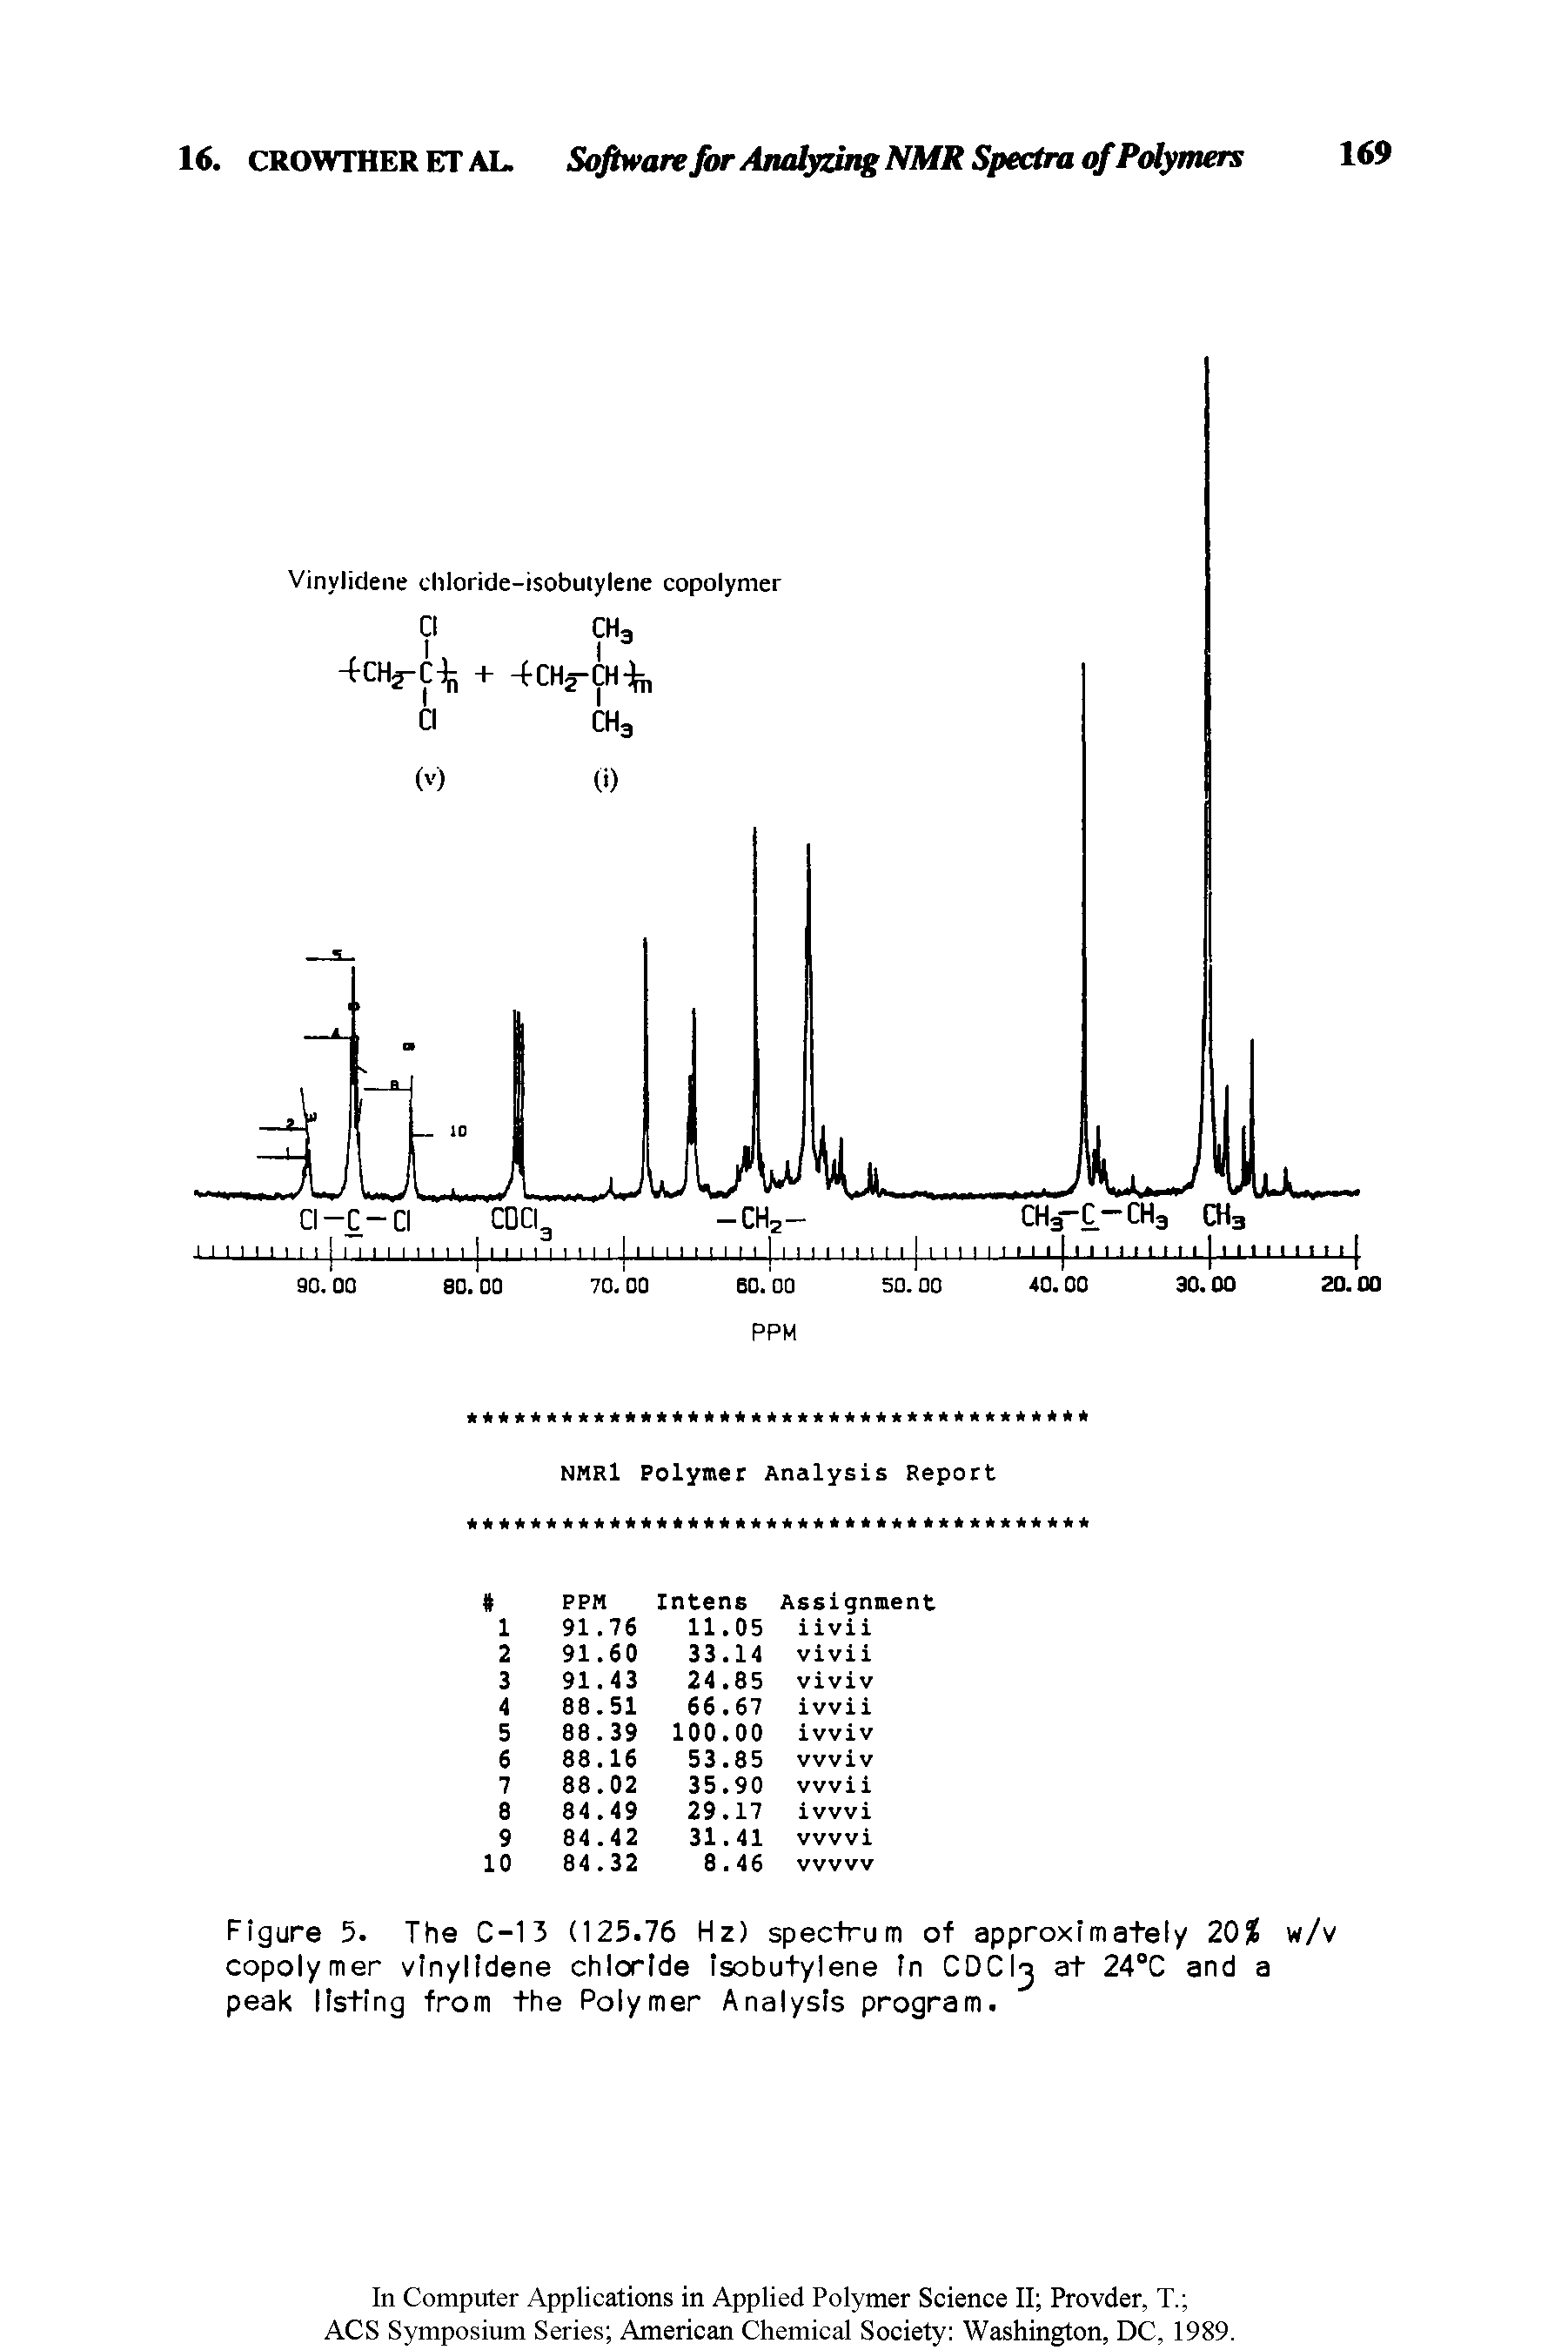 Figure 5. The C-15 (125.76 Hz) spectrum of approximately 20% w/v copolymer vinylidene chloride Isobutylene In CDCI at 24°C and a peak listing from the Polymer Analysis program.